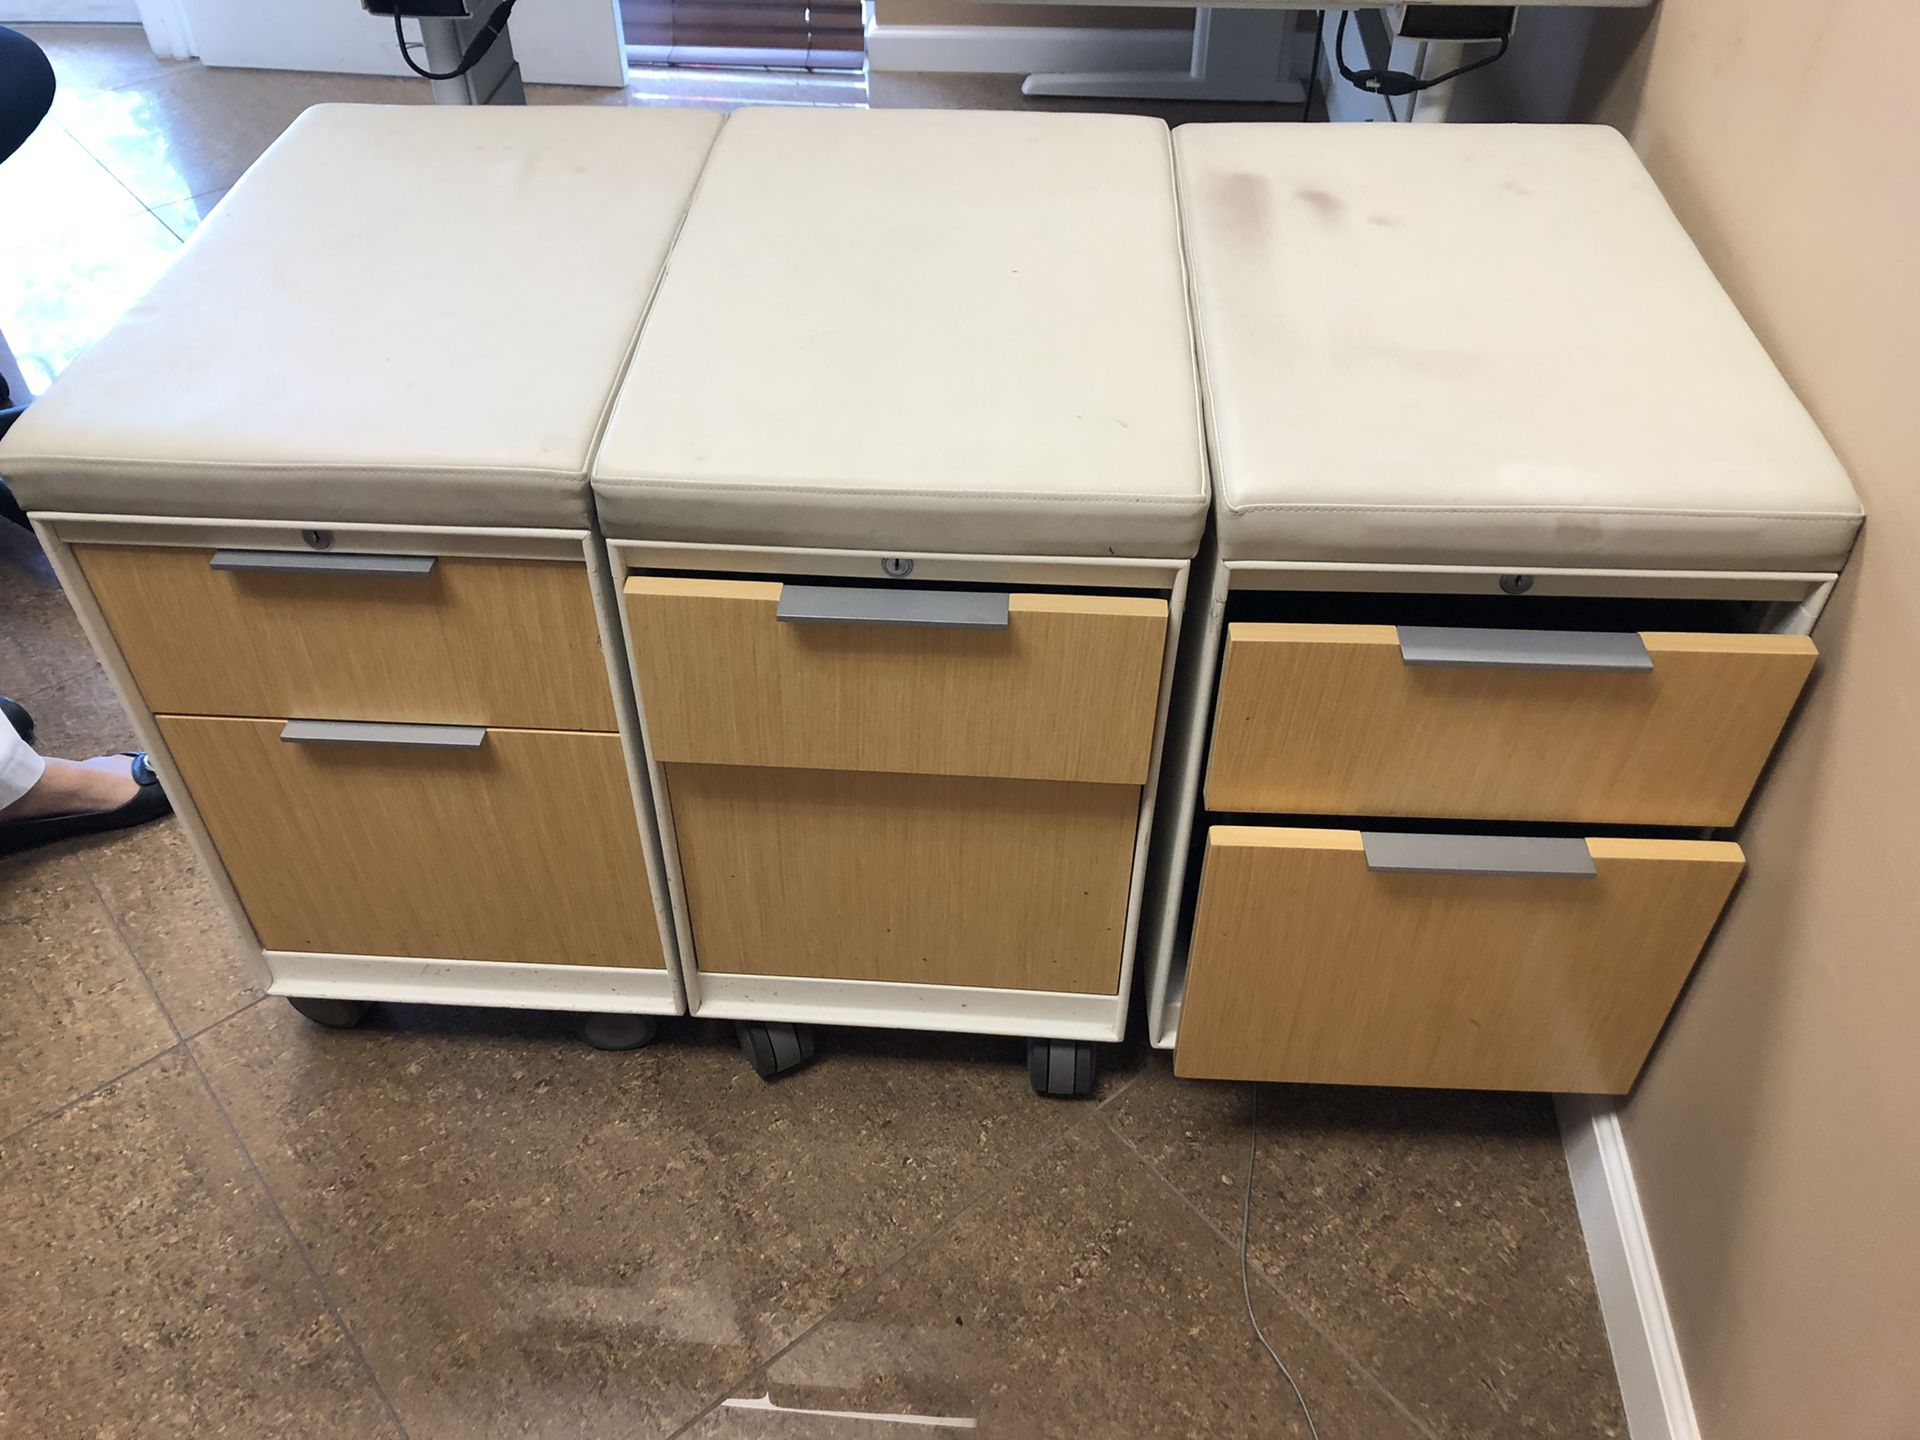 5 Moving Filing Cabinets